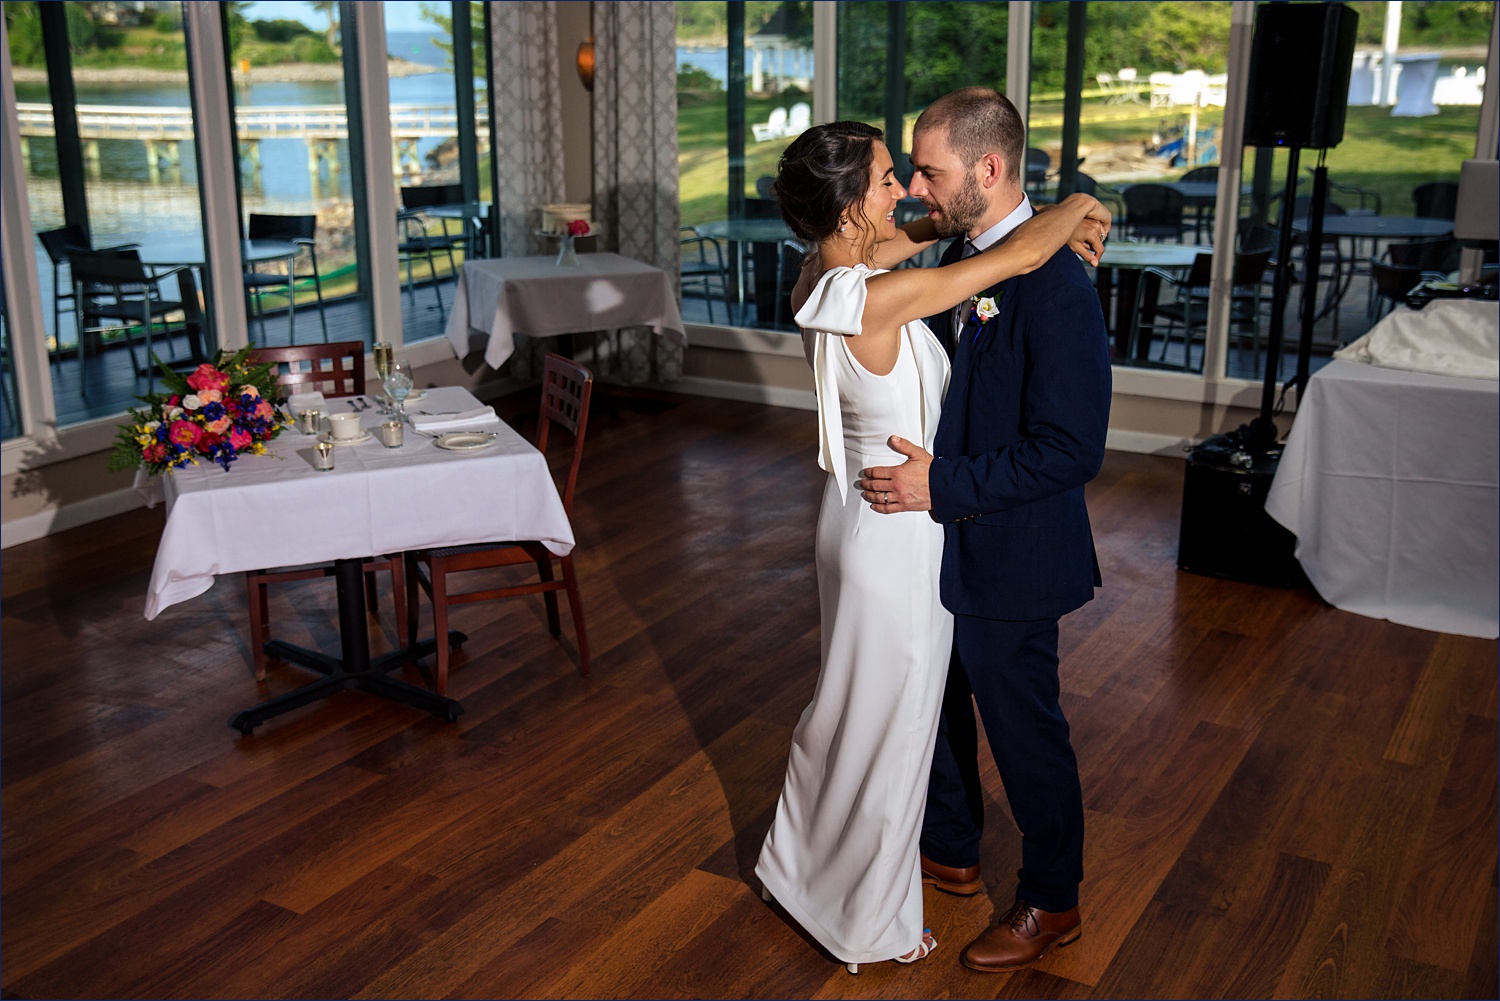 The first dance on the floor at Dockside Guest Quarters